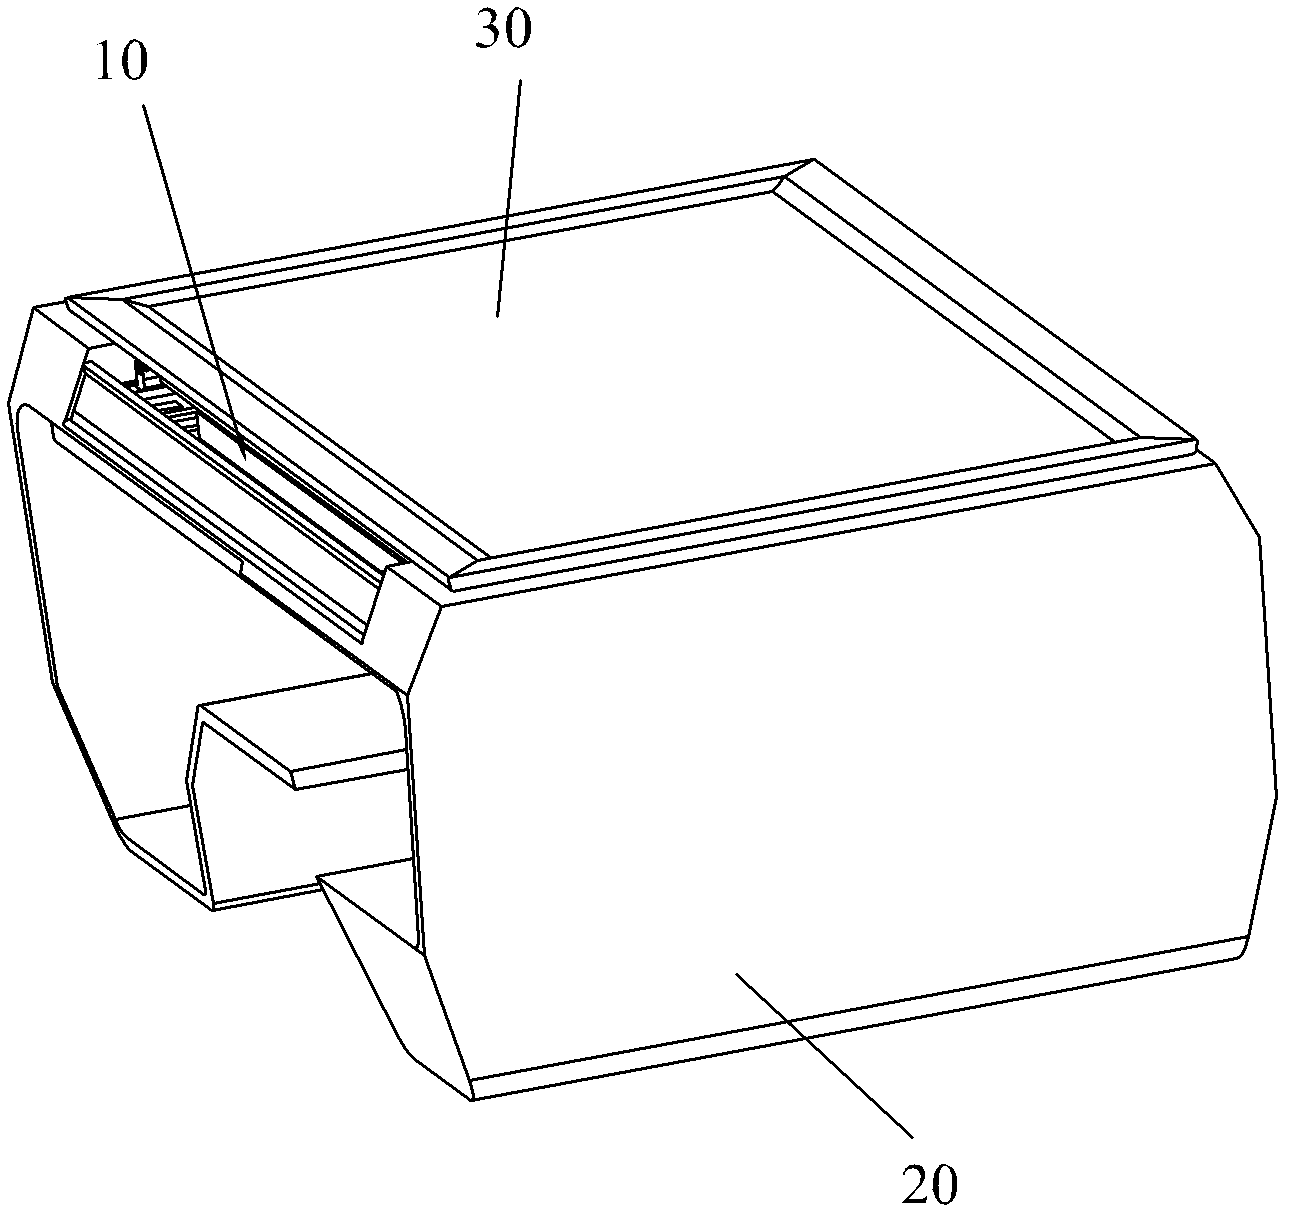 Lifting desktop device and display integrated desk with same